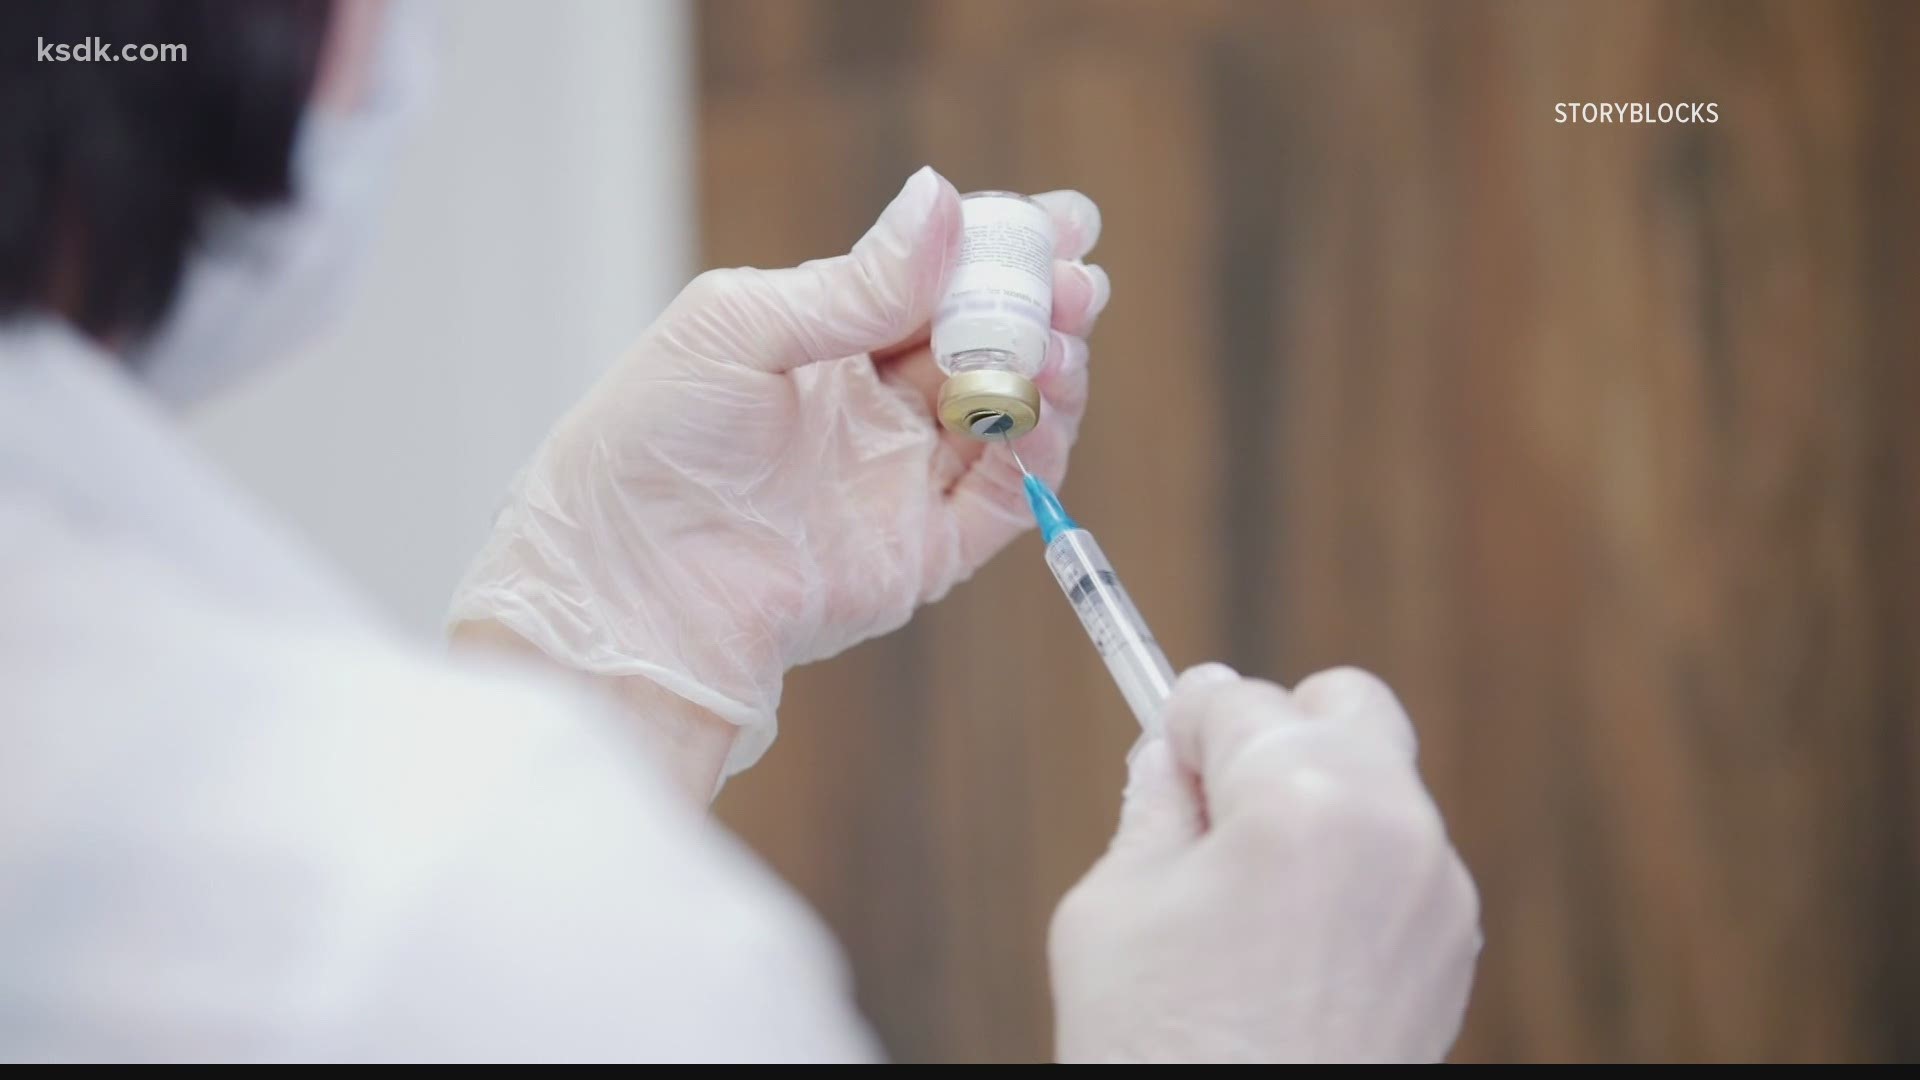 Some states expect to begin injections Tuesday, but Missouri DHSS spokeswoman Lisa Cox said Monday that the first doses in Missouri are expected a day later